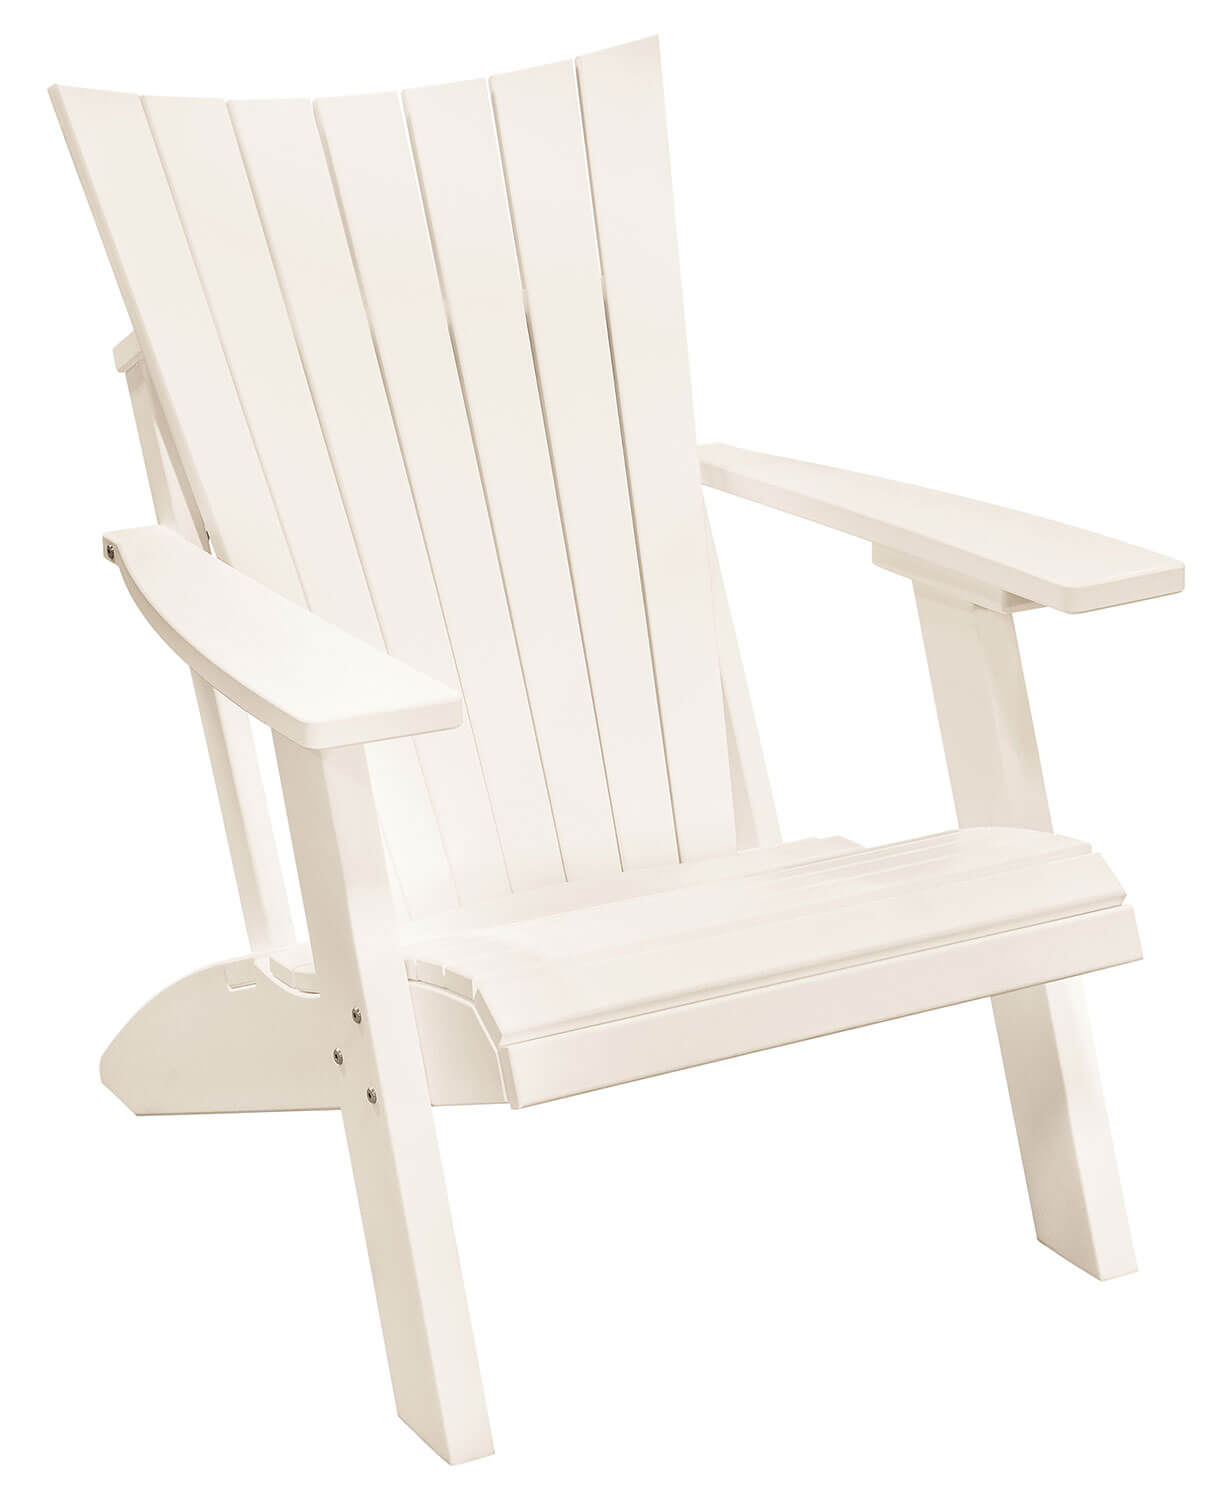 EC Woods Wells Adirondack Outdoor Poly Chair Shown in Bright White